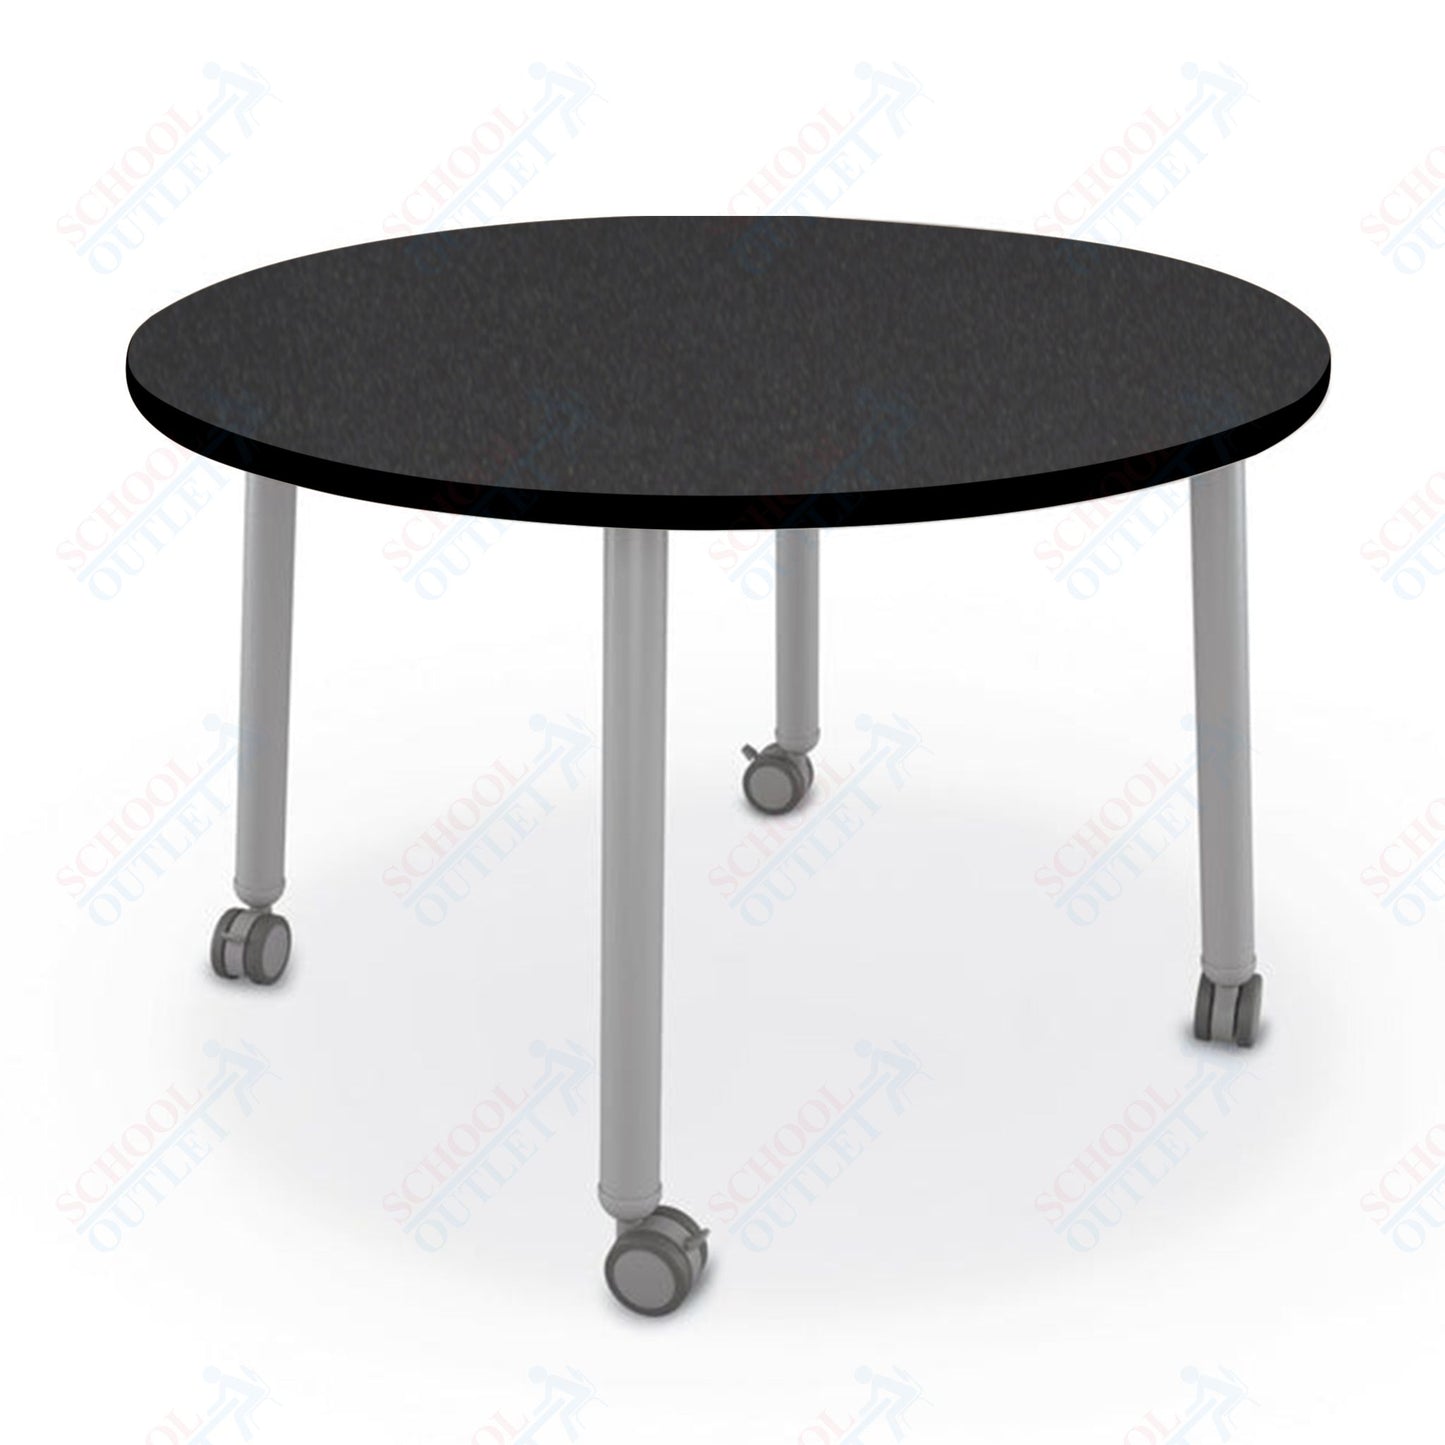 Mooreco Akt Table – 48" Round, Laminate Top, Fixed Height Available in 29"H, 36"H, or 42"H